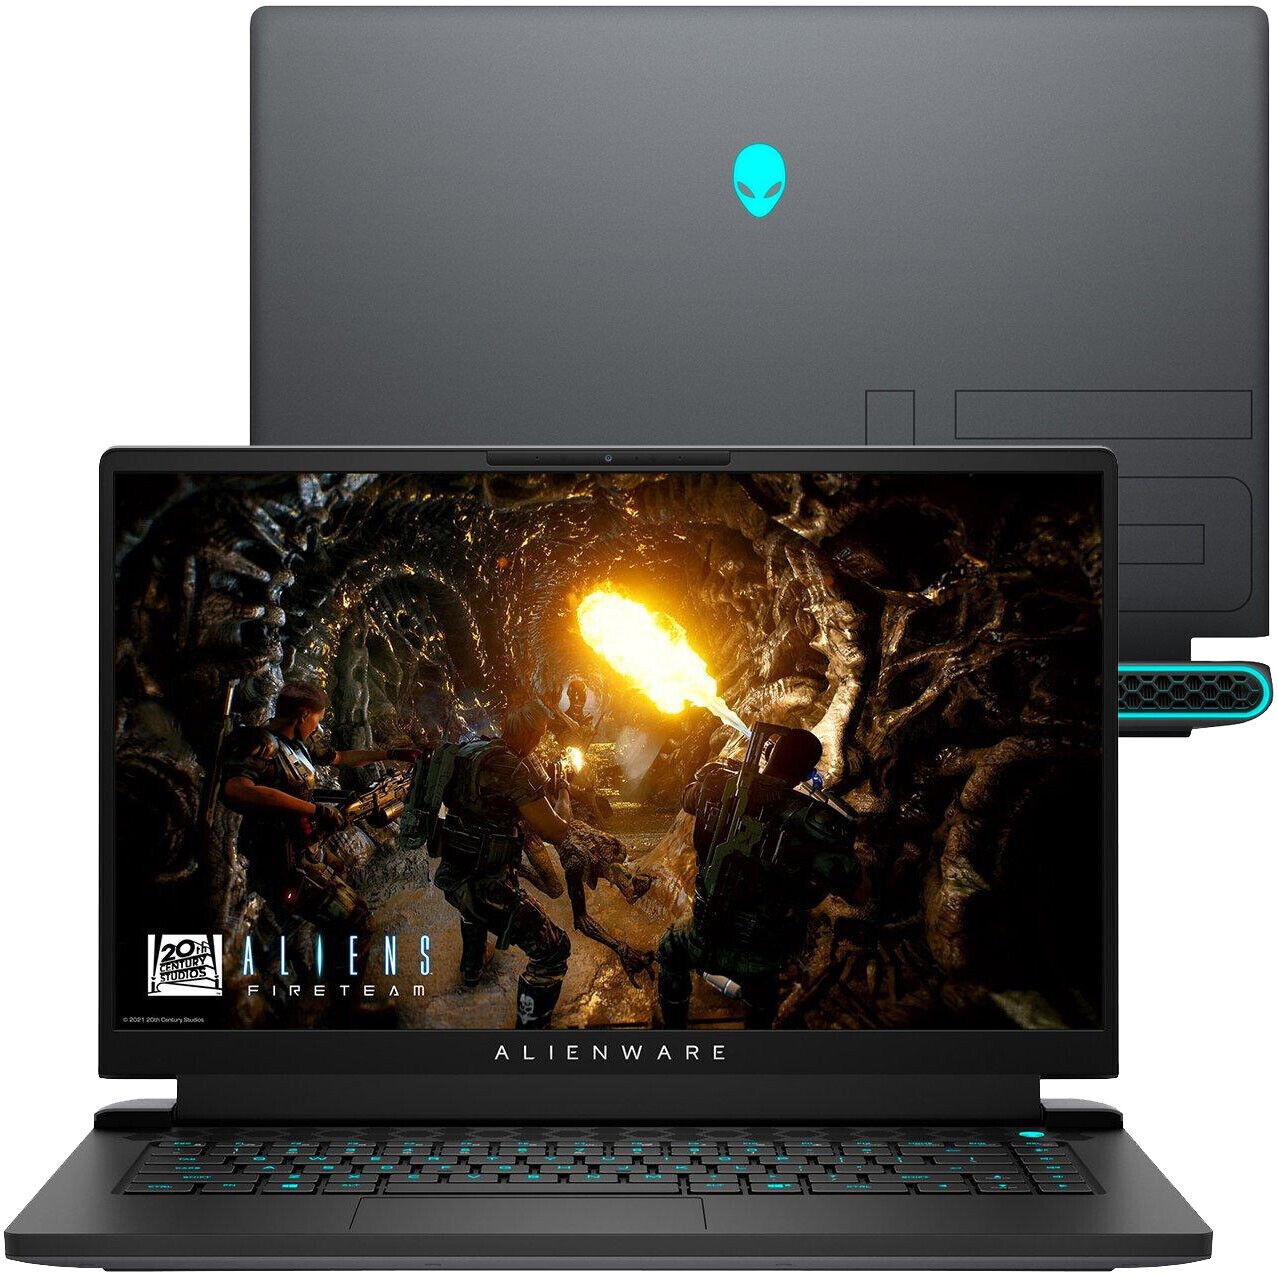 Alienware M15 R6 15.6" Gaming Laptop - IntelCore i7, 512GB SSD, 16GB RAM - Dark Side of the Moon